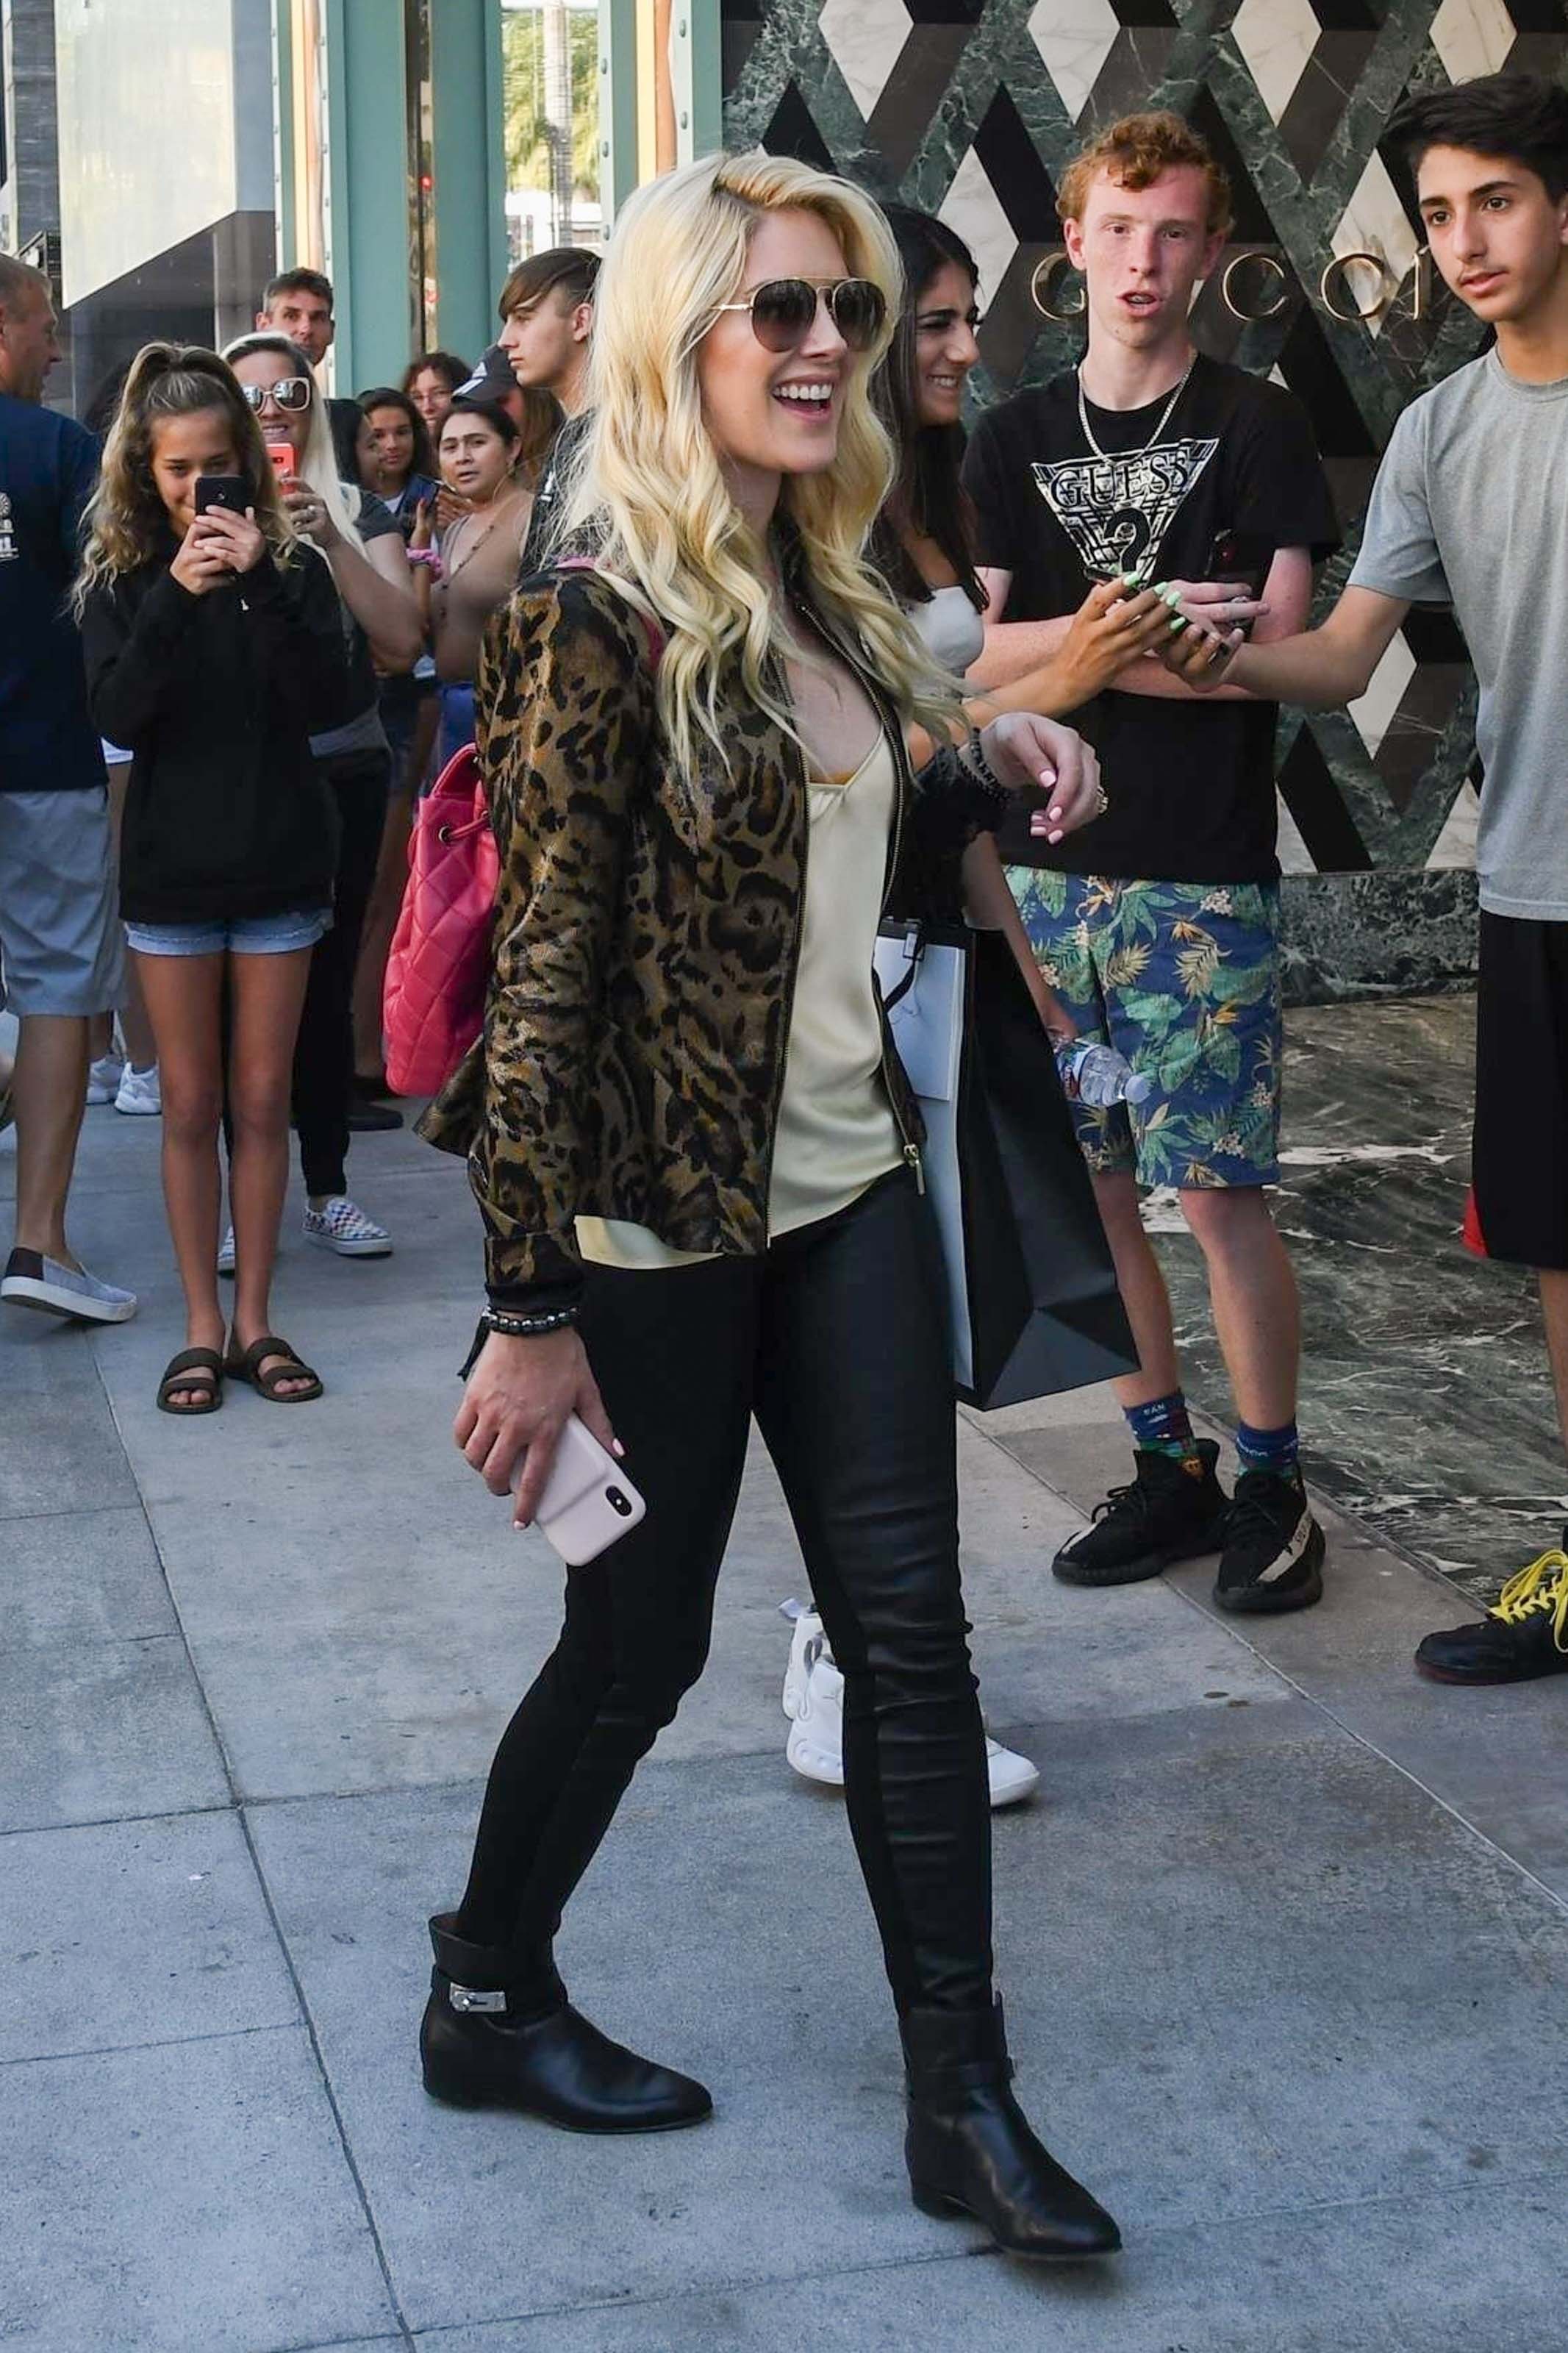 Heidi Montag at Gucci in Beverly Hills